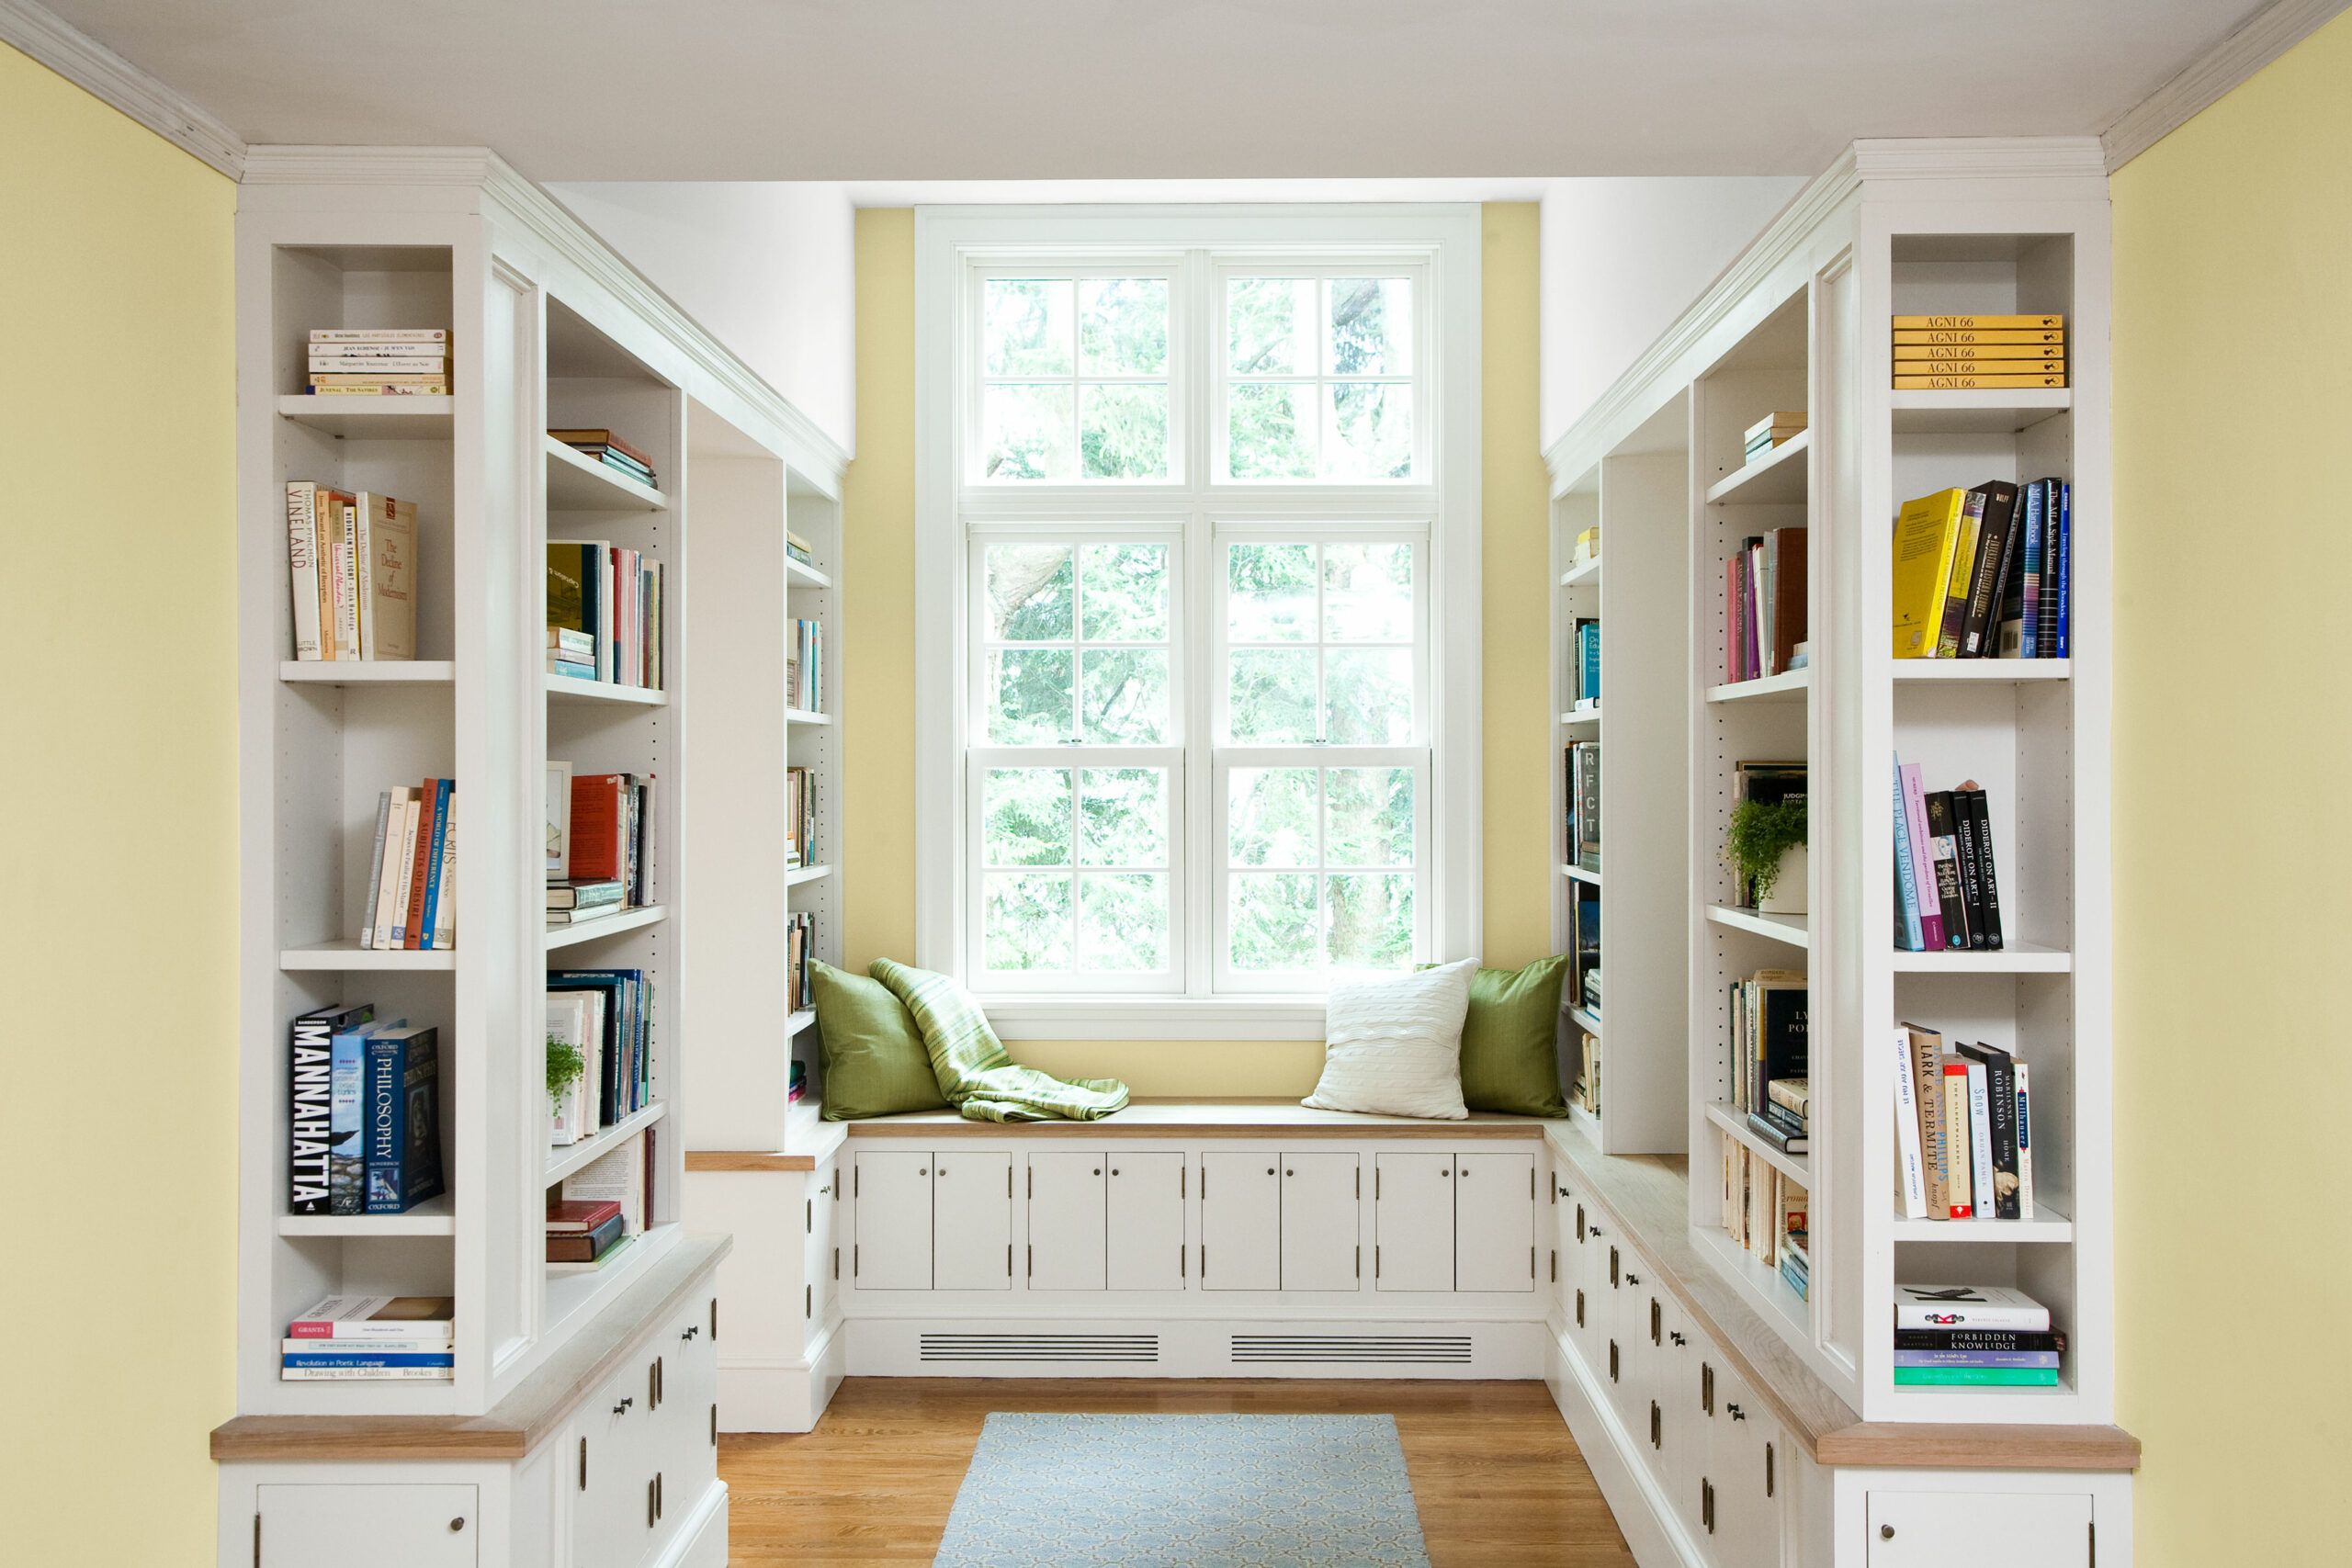 Home Library Ideas - This Old House